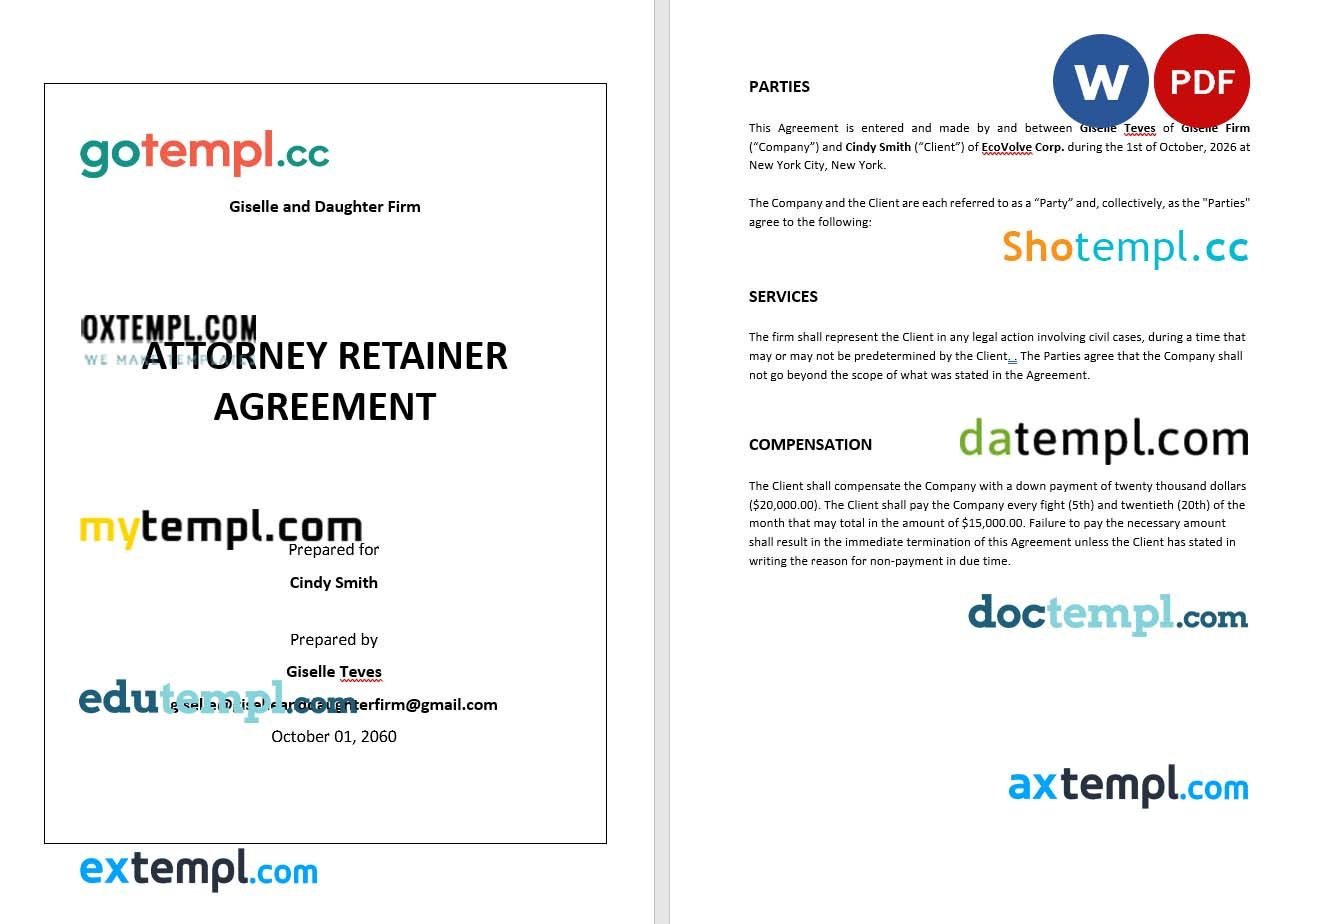 Attorney Retainer Agreement example, fully editable